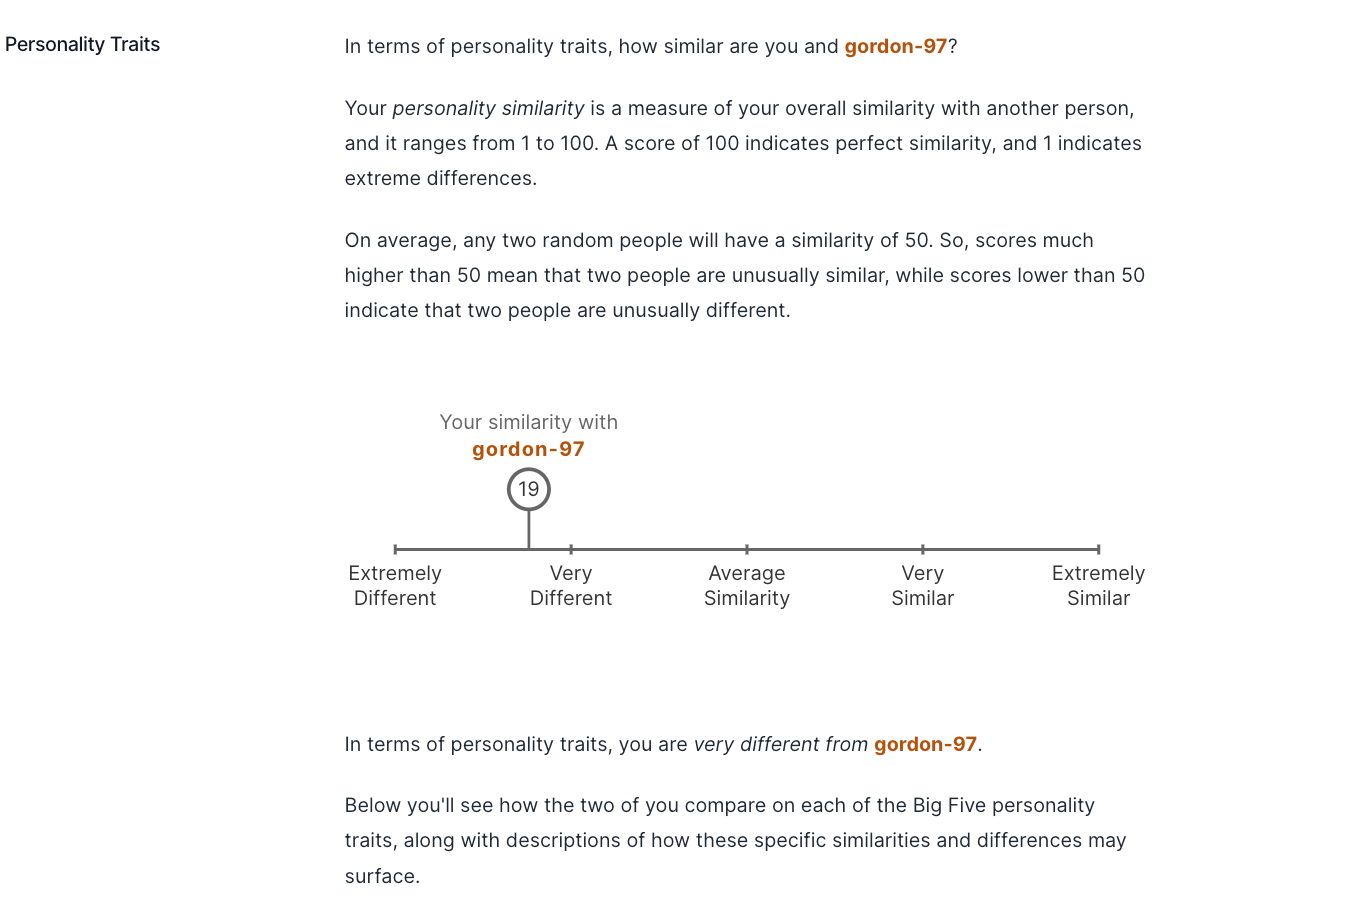 An image of a personality similarity analysis from TraitLab's Comparisons